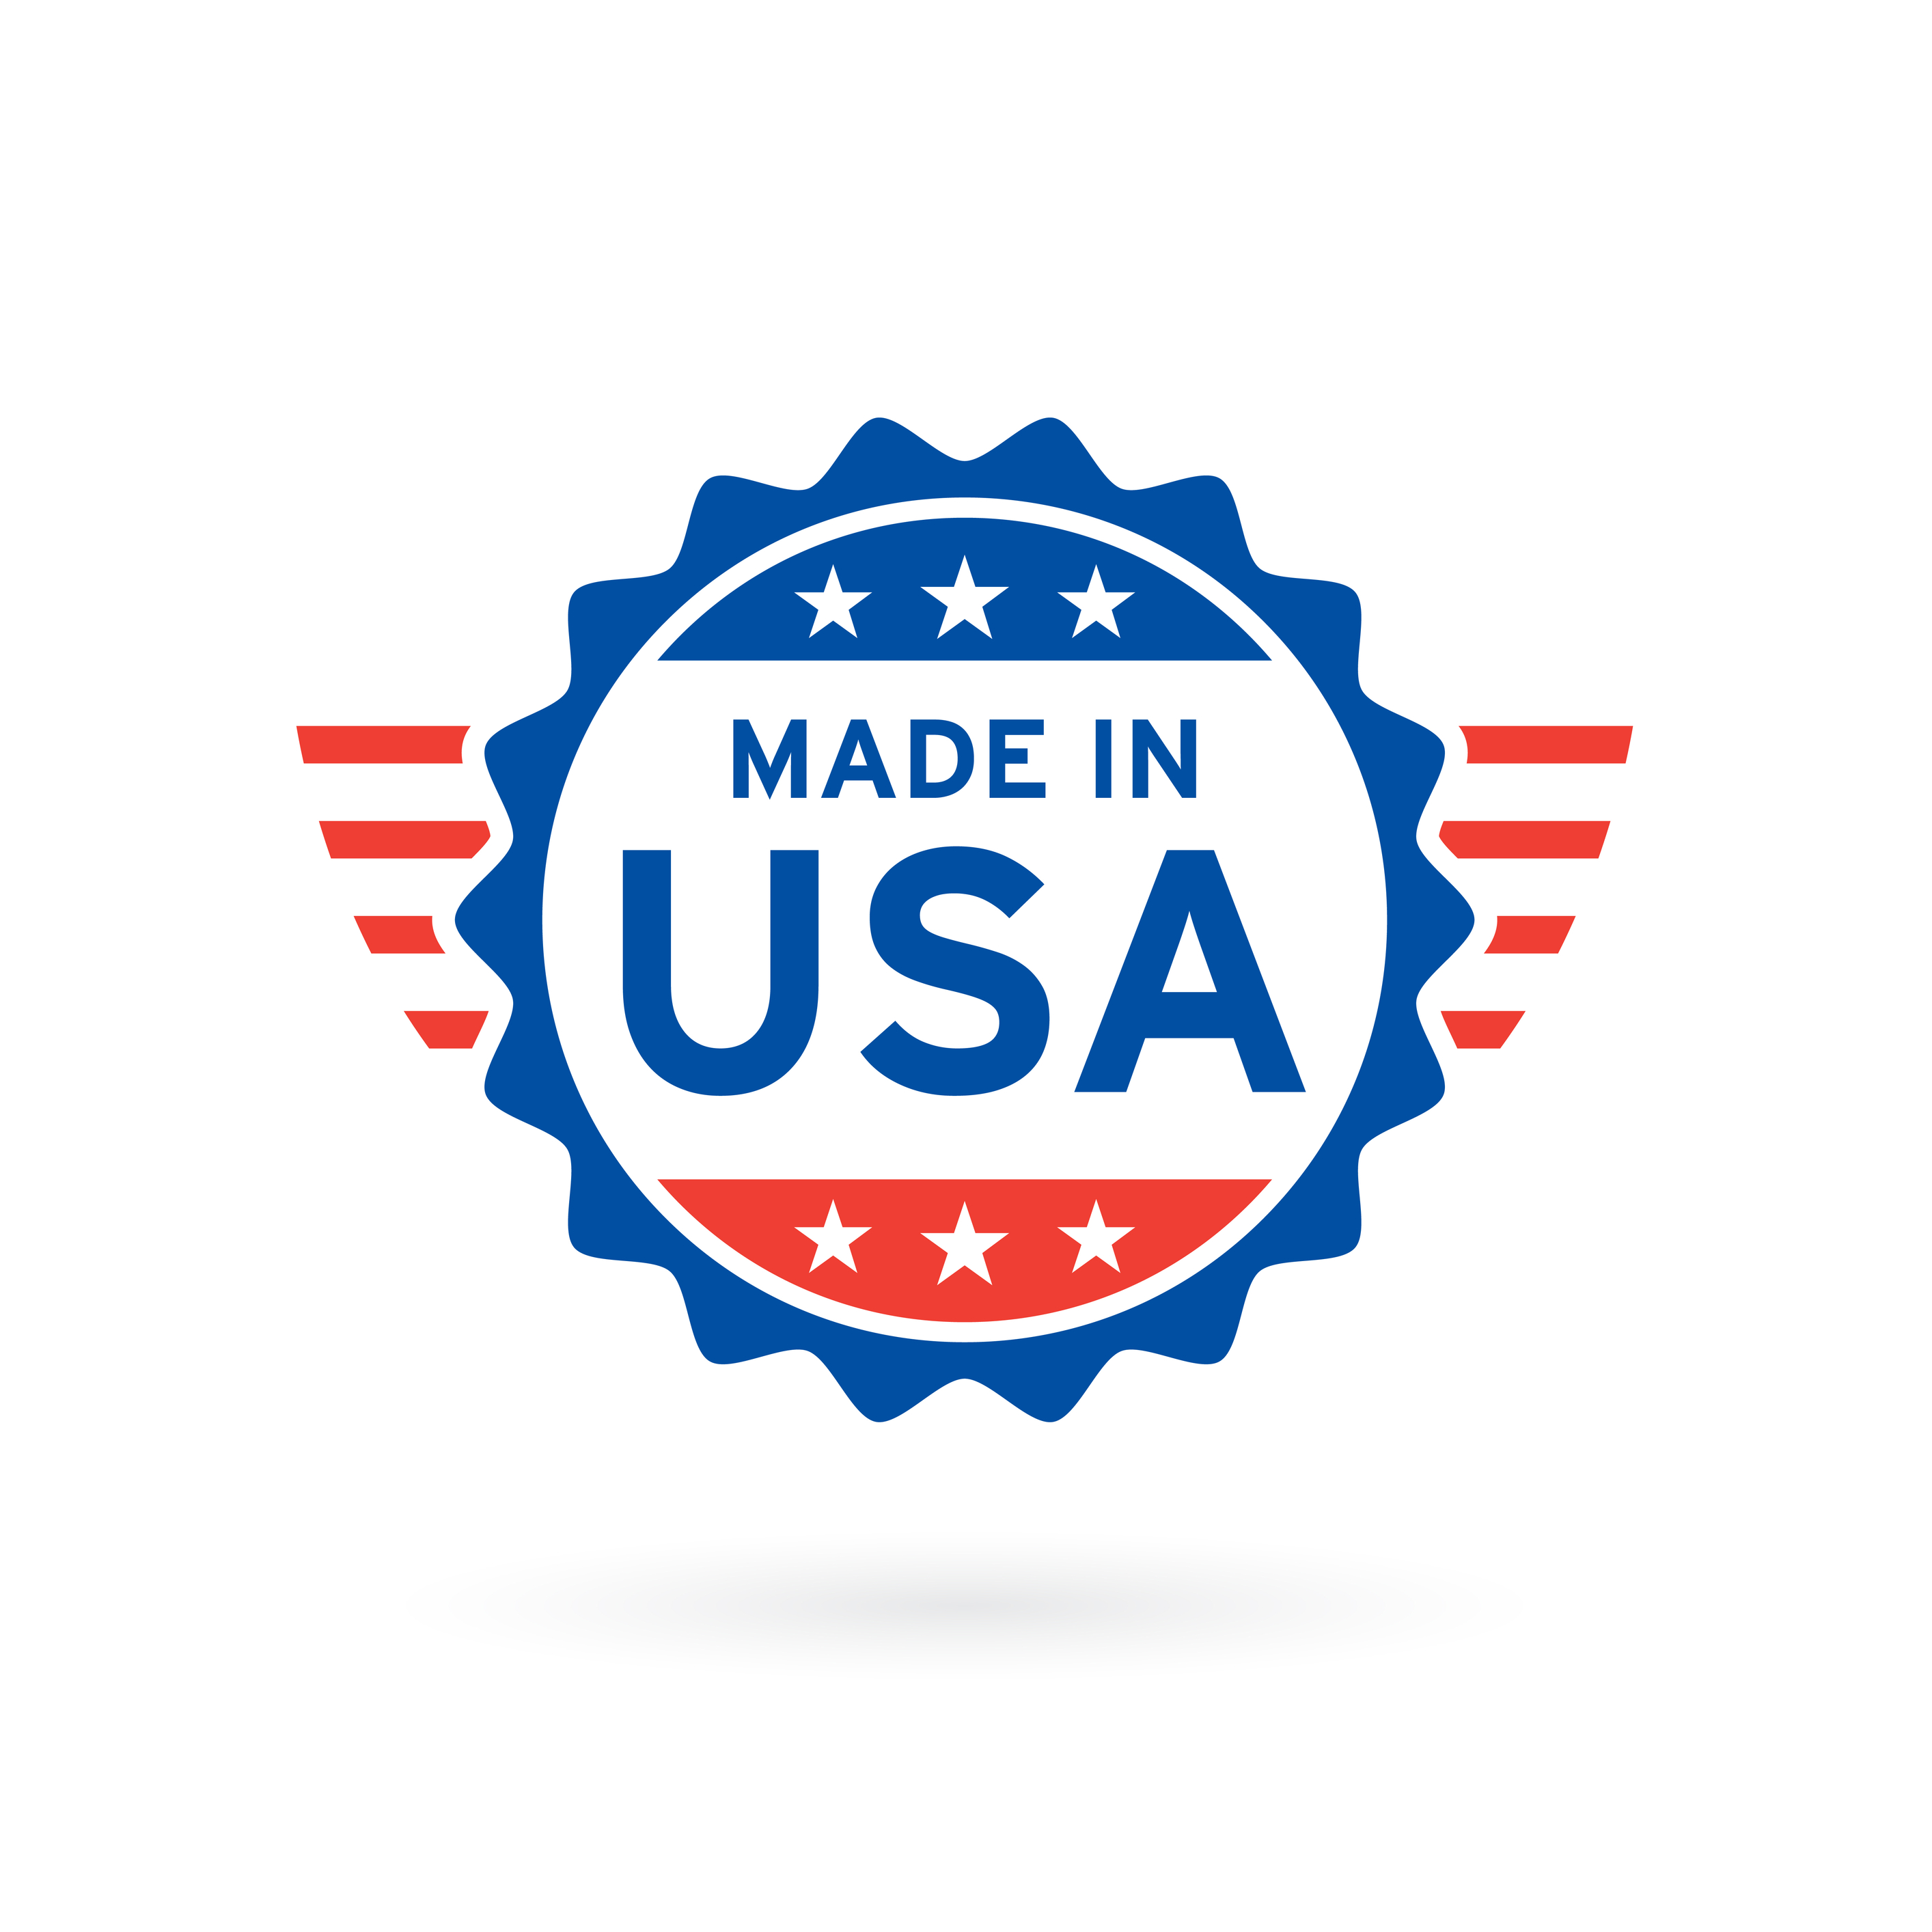 Image result for made in the usa